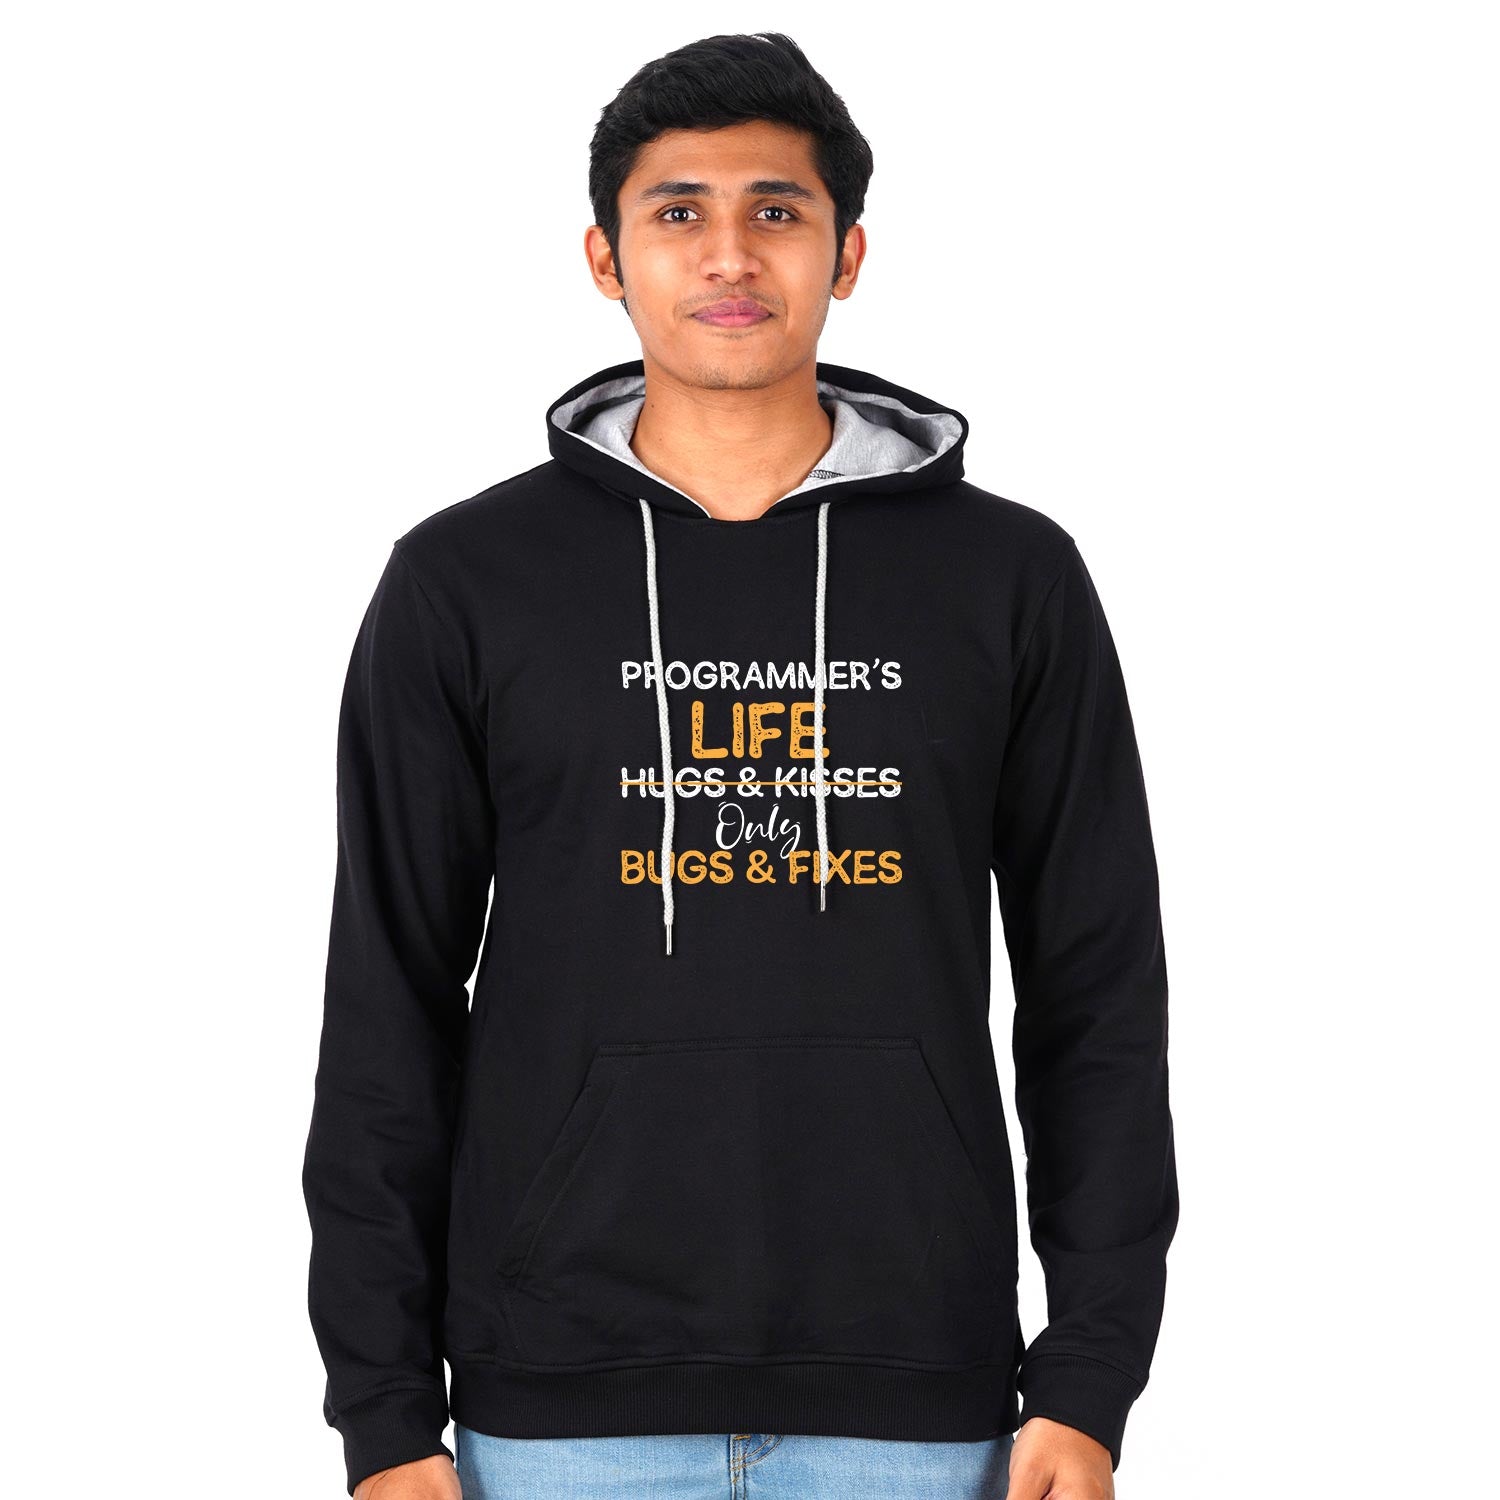 Programmers Life No Hugs & Kisses Only Bugs & Fixes Unisex Hoodie